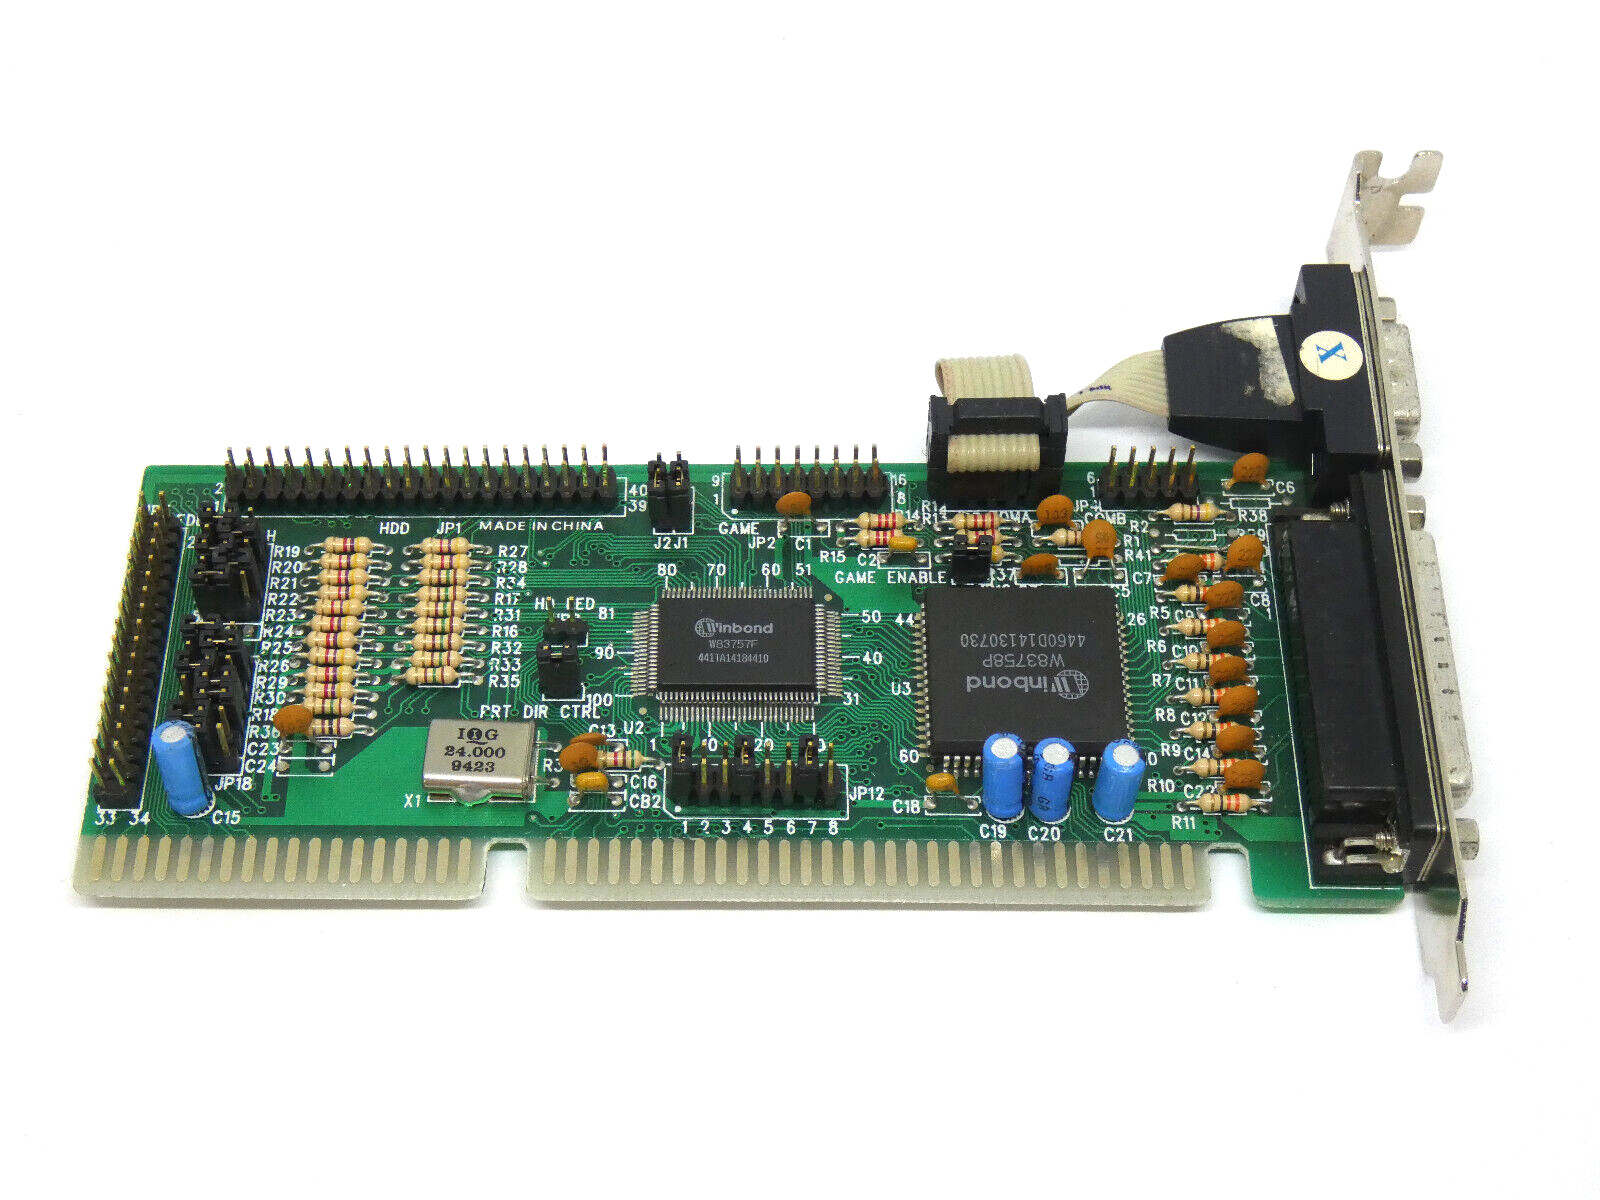 Winbond W83757F Multi I/O Controller Serial, Parallel, Floppy, IDE  - ISA CARD